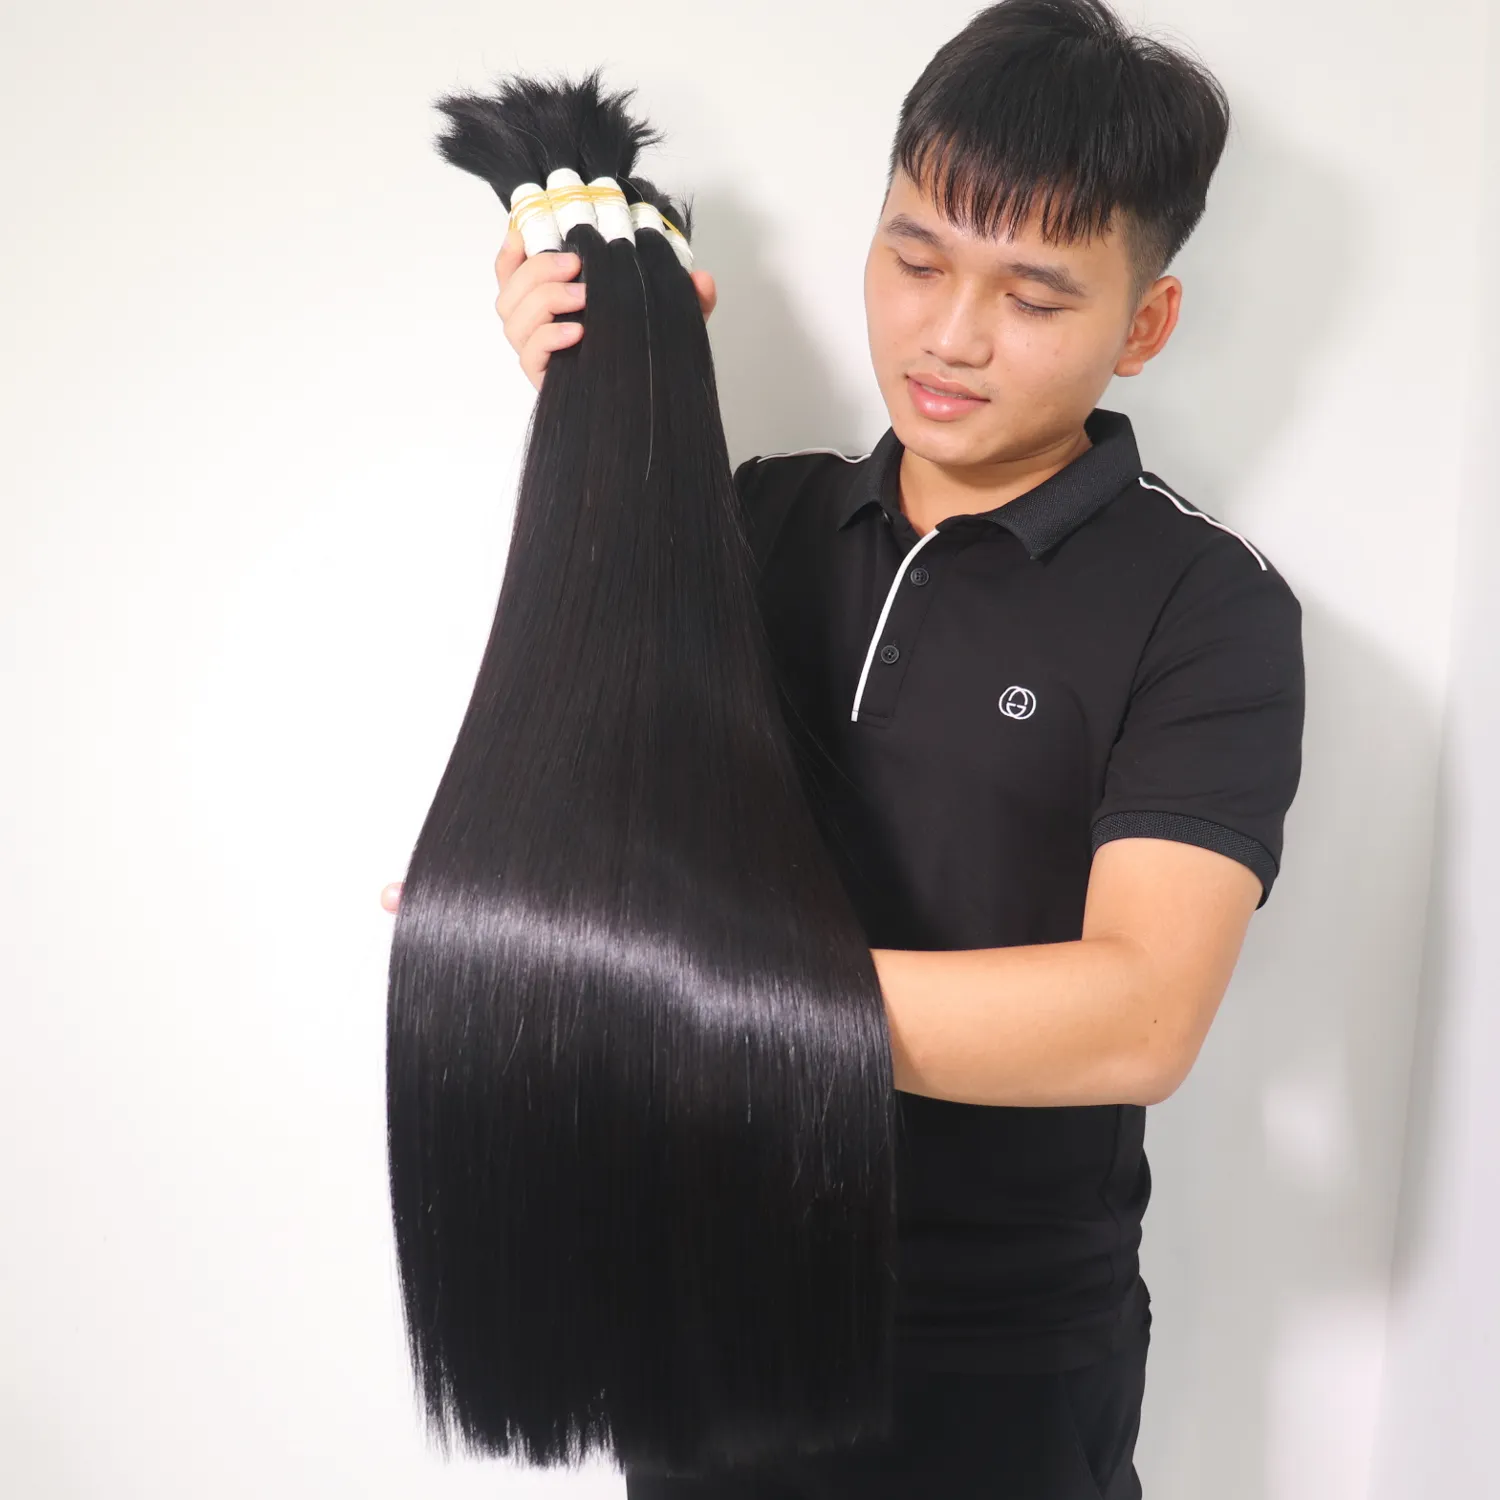 Raw Russian Bulk Hair One Person Head Just Cut From Black Women Wholesale Price Only In AZ Hair Vietnam Factory